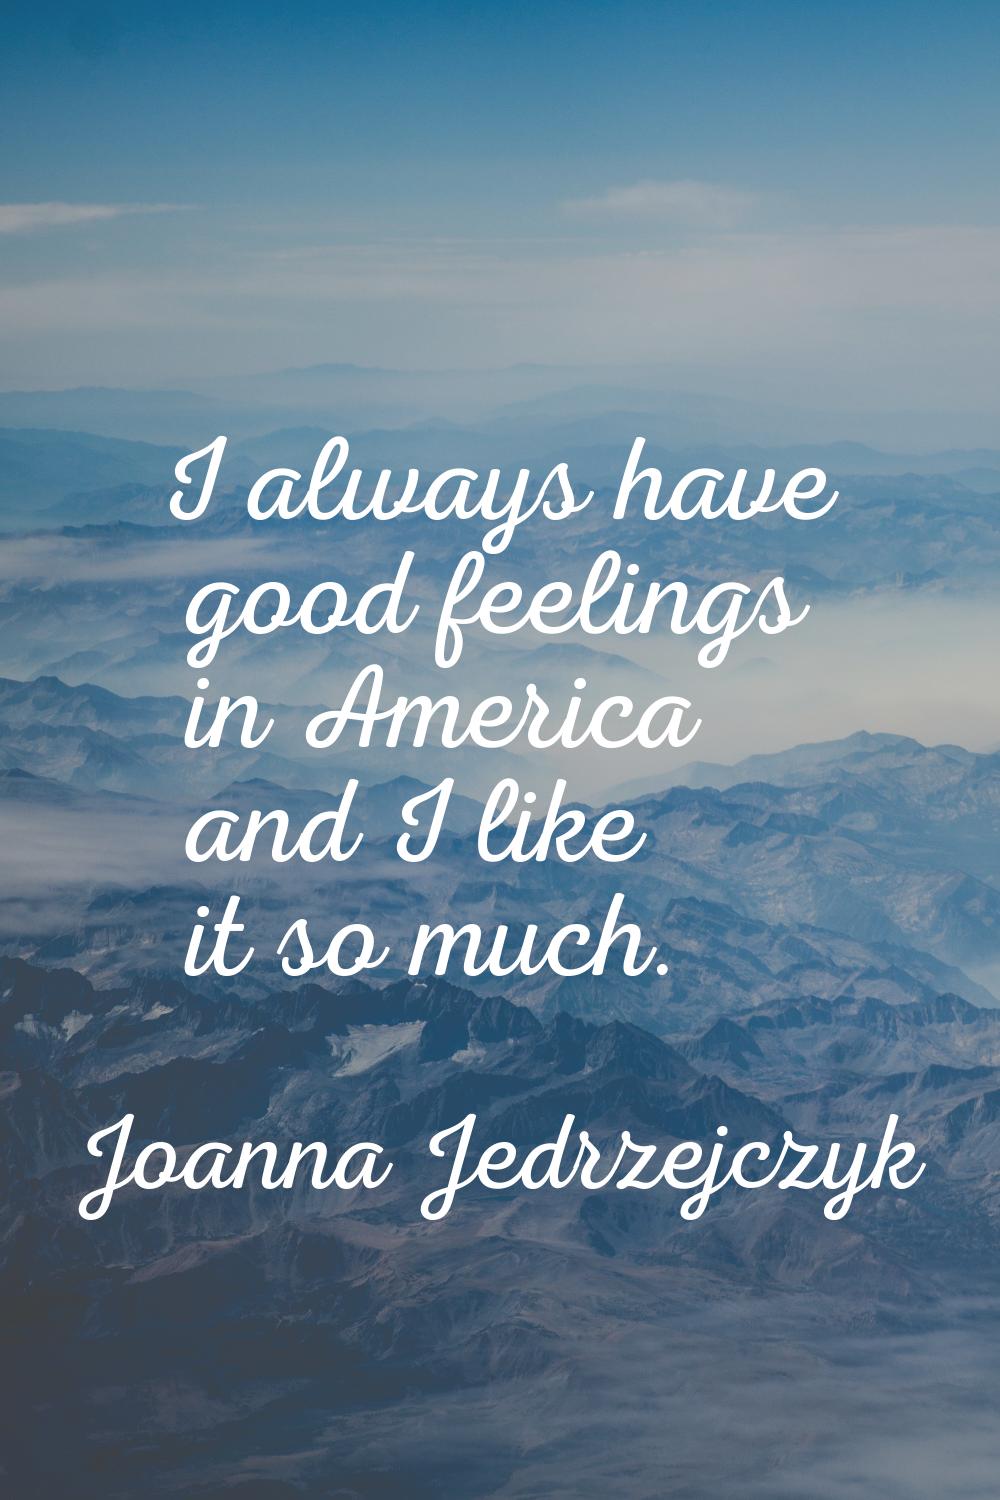 I always have good feelings in America and I like it so much.